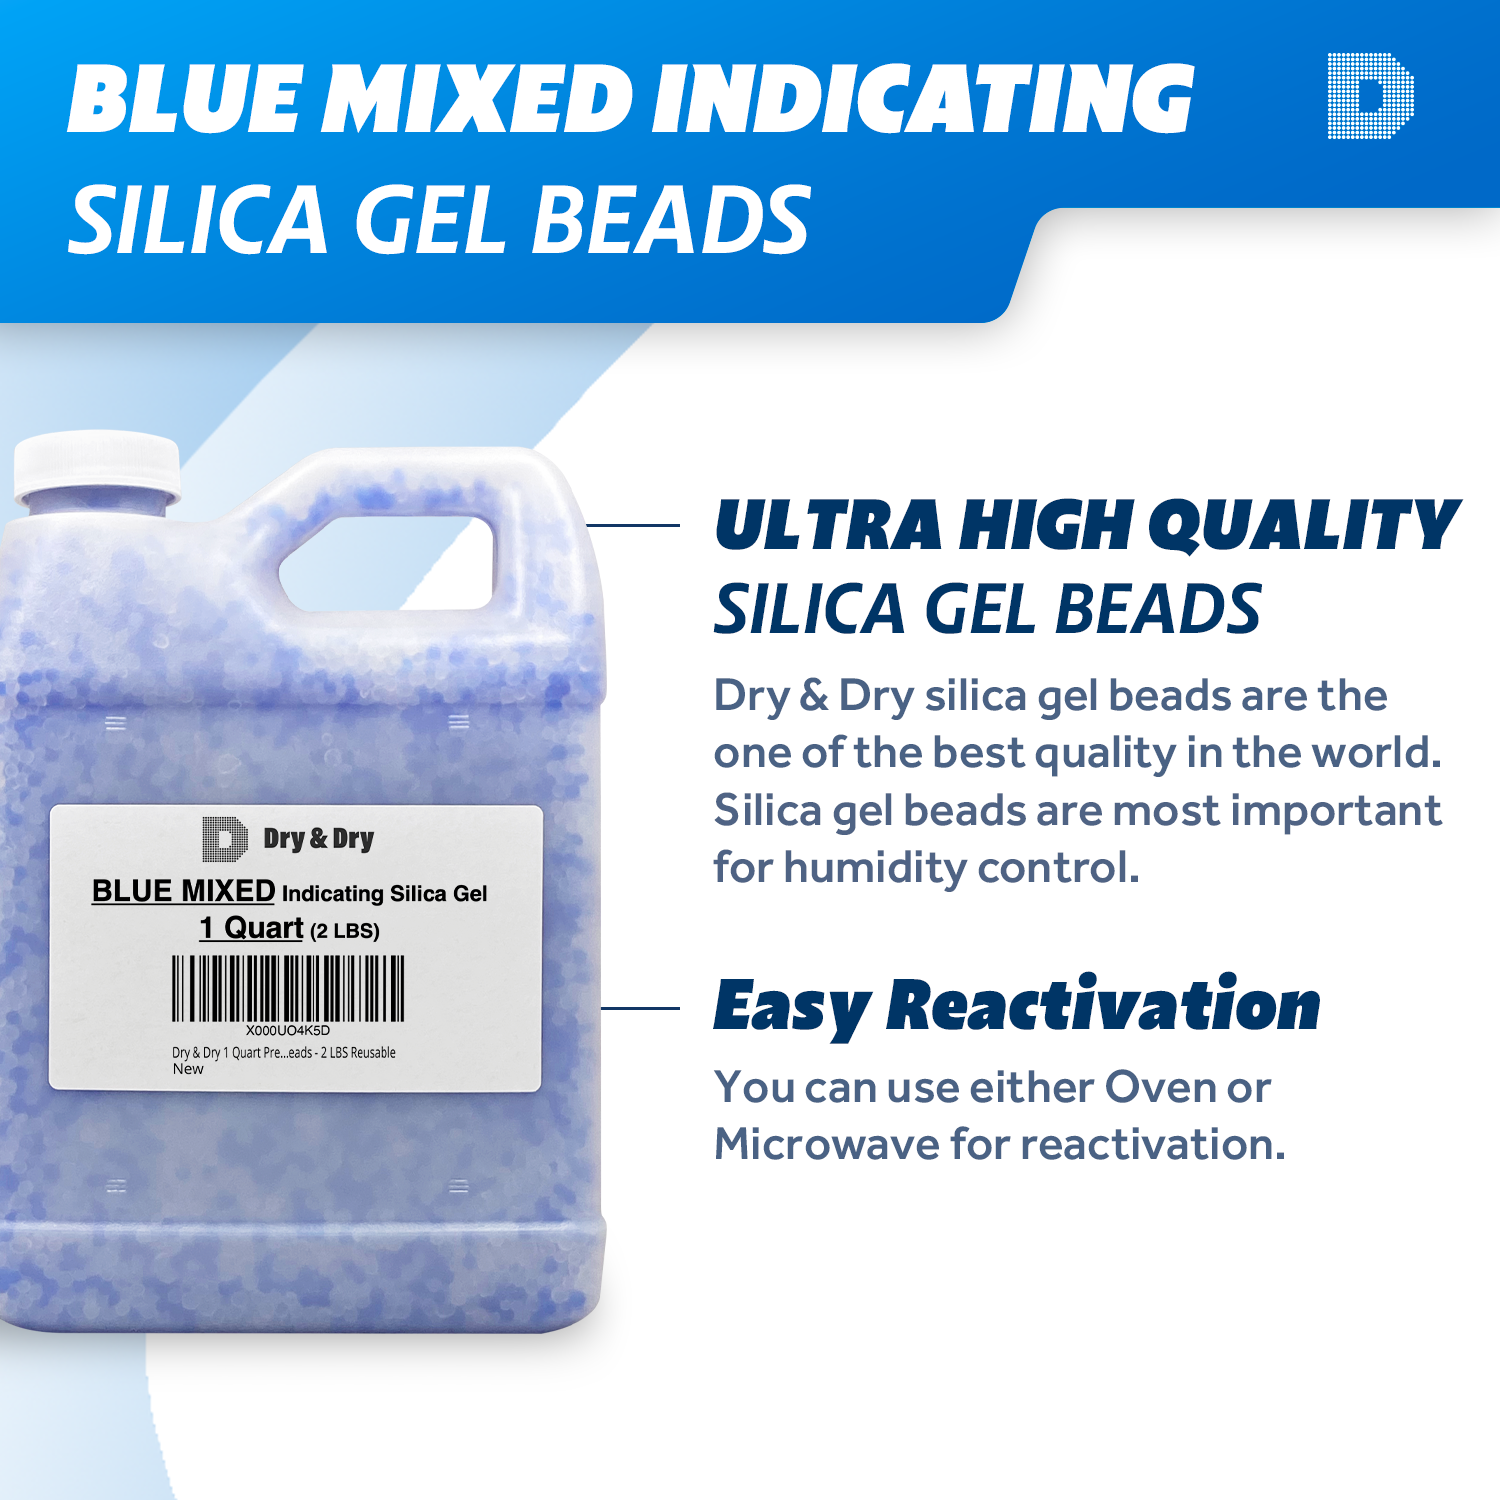 1 Quart(2 LBS) Premium White & Blue Mixed Silica Gel Beads - Rechargeable Color Changing Air Drying